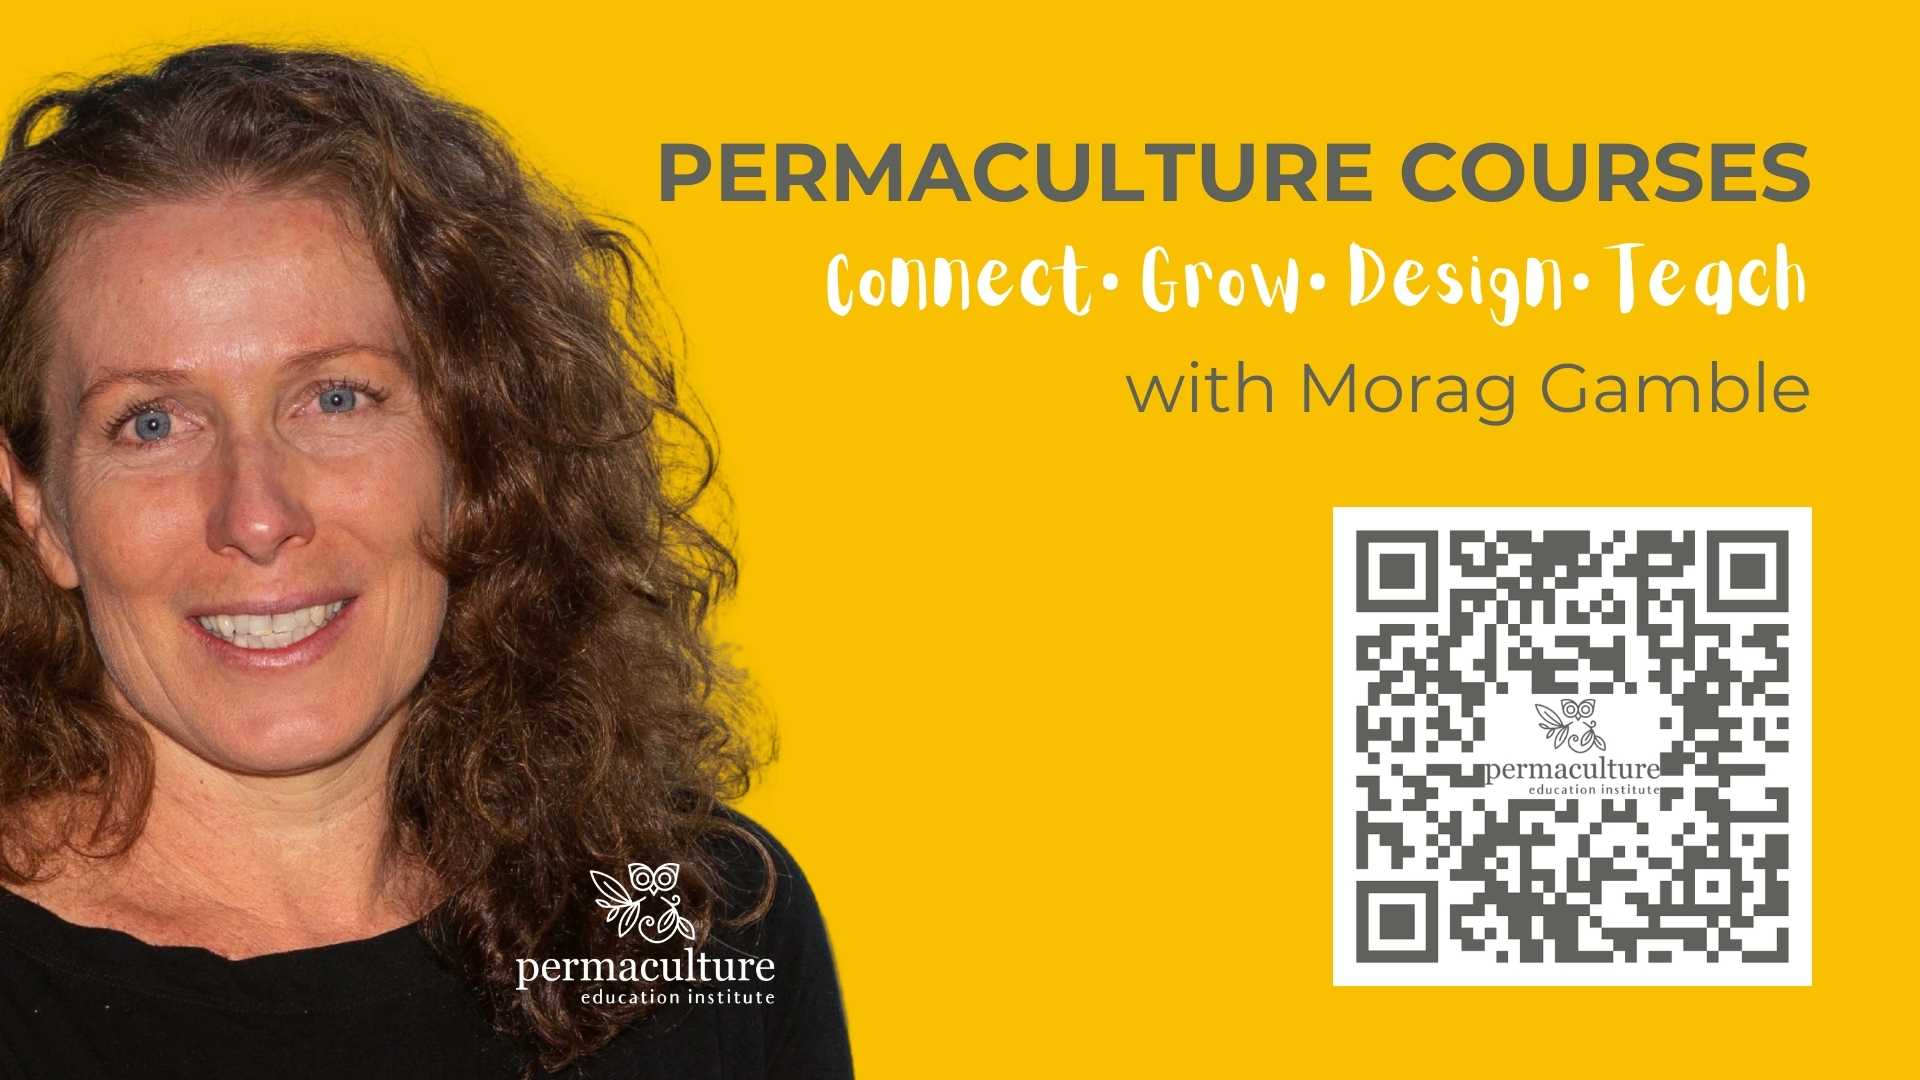 Learn permaculture with Morag Gamble